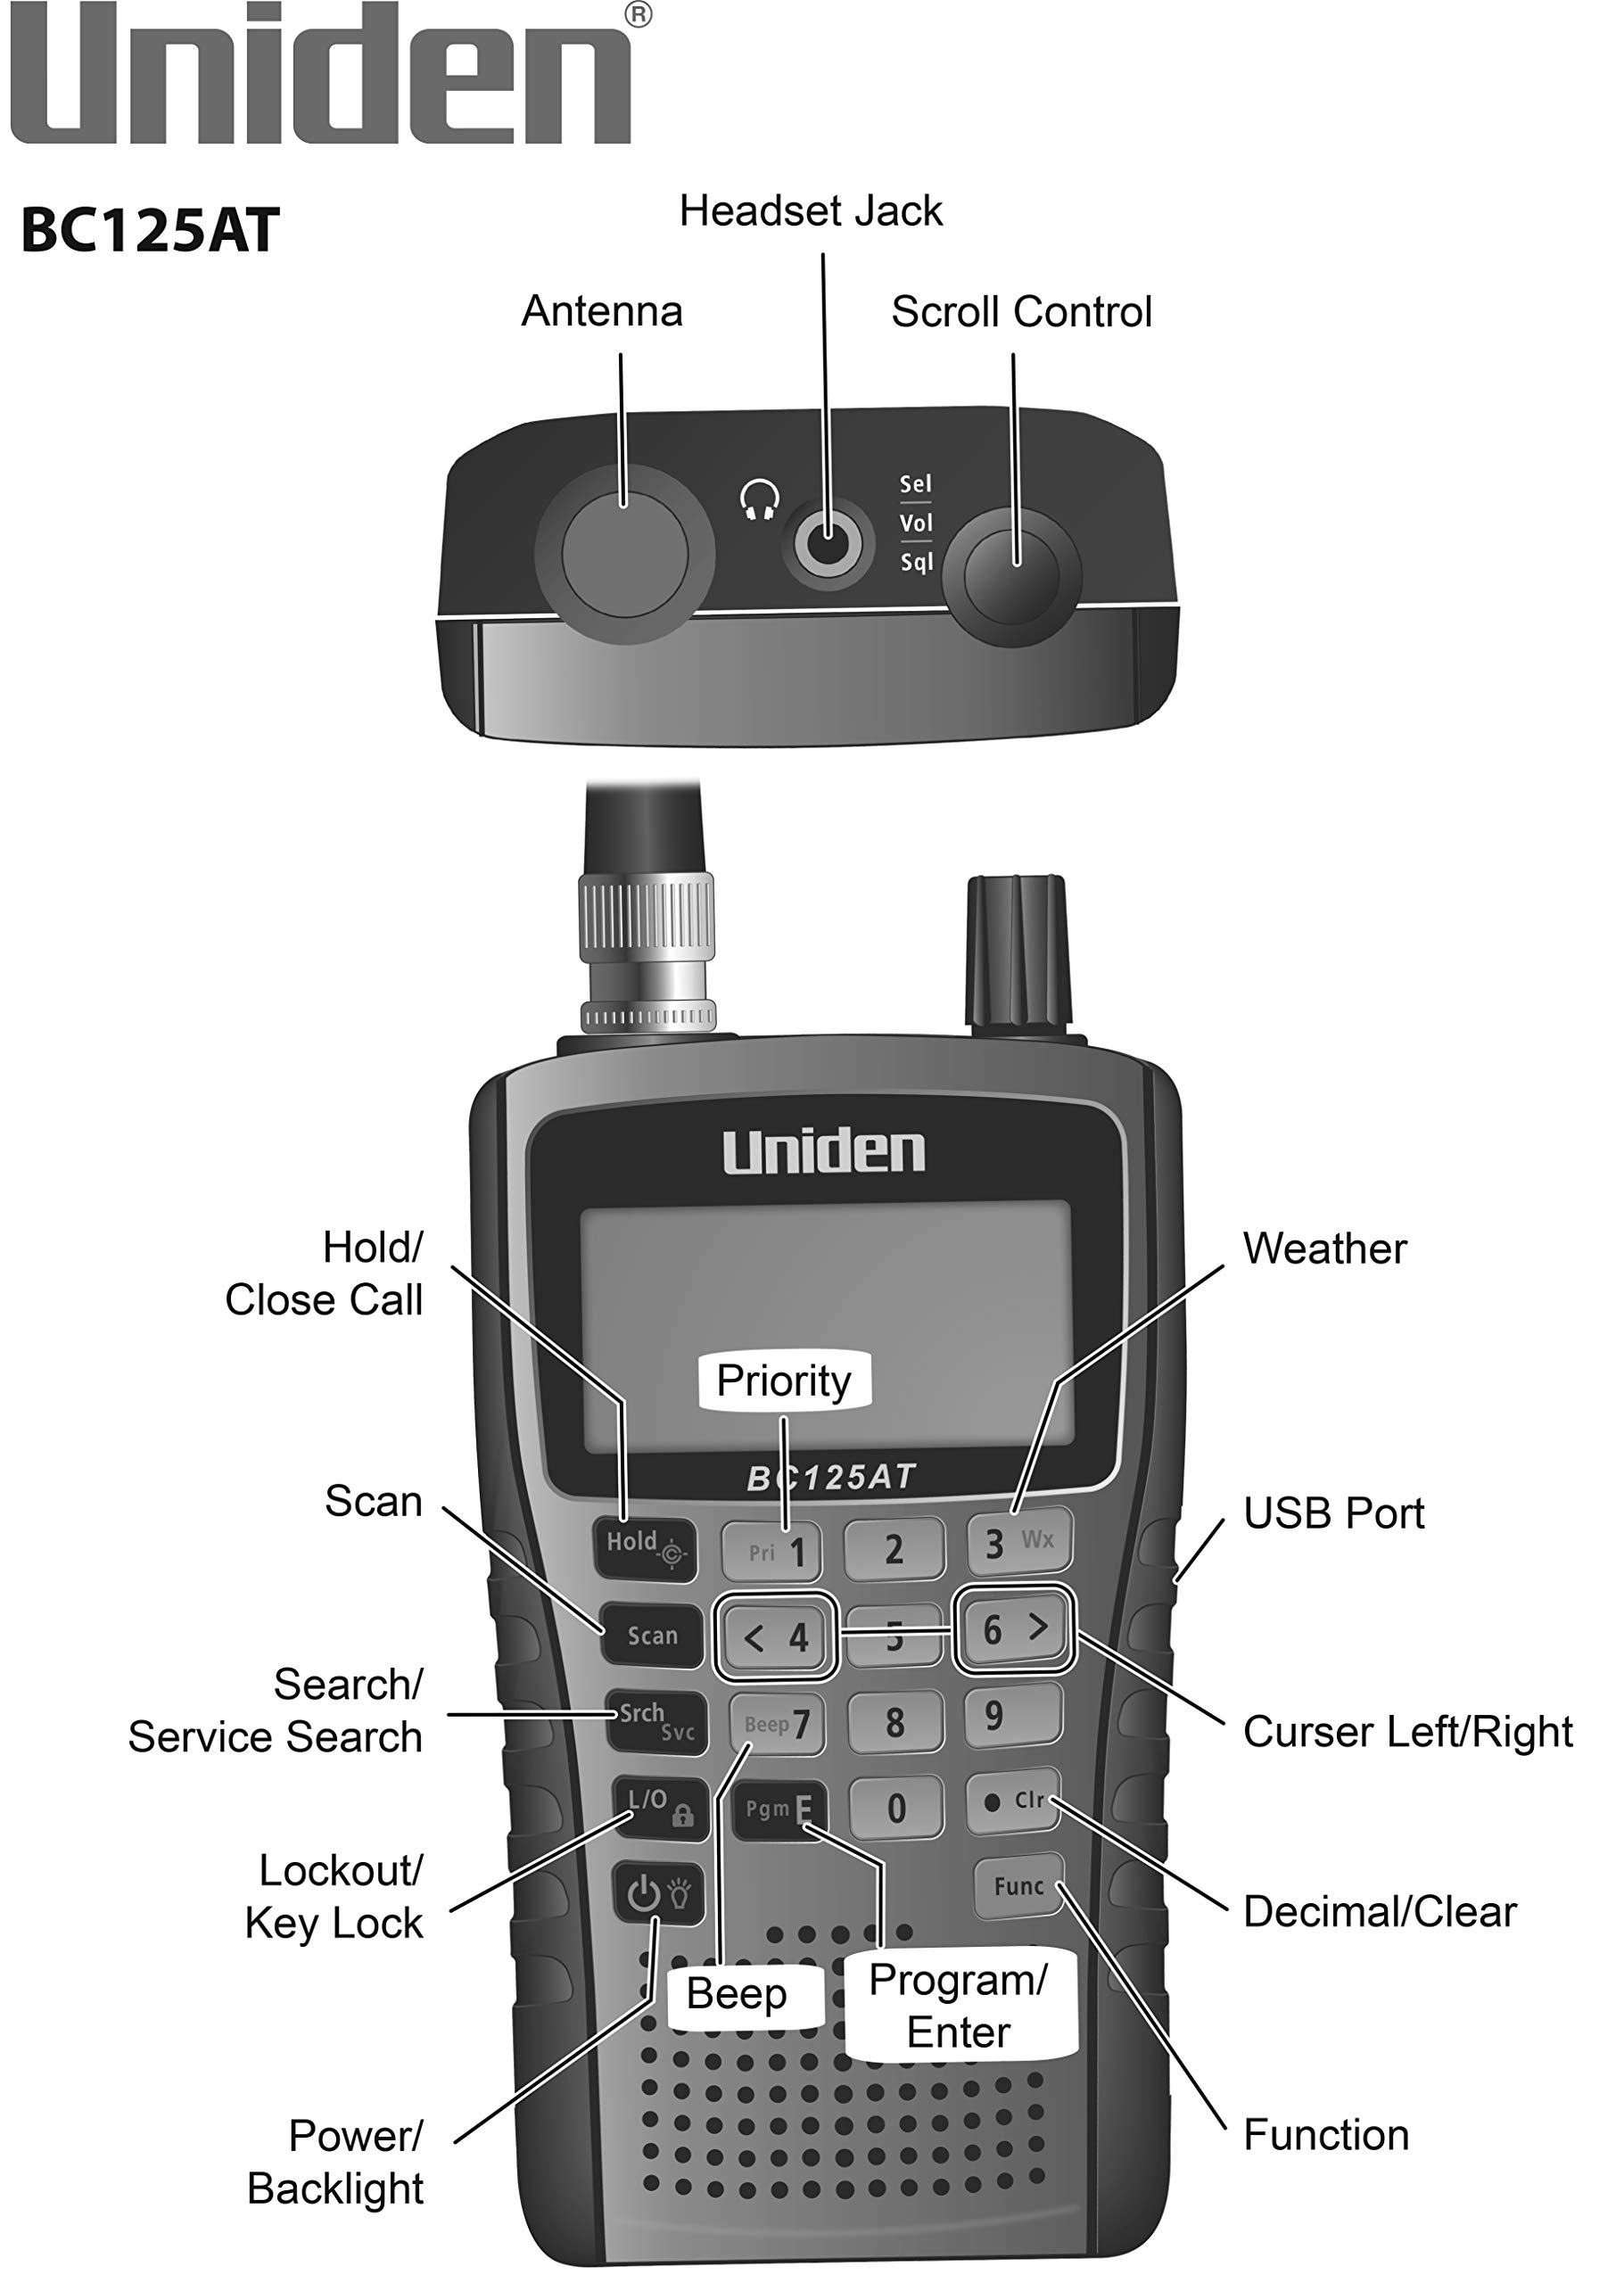 Uniden Bearcat BC125AT Handheld Scanner, 500-Alpha-Tagged Channels, Close Call Technology, PC Programable, Aviation, Marine, Railroad, NASCAR, Racing, and Non-Digital Police/Fire/Public Safety.